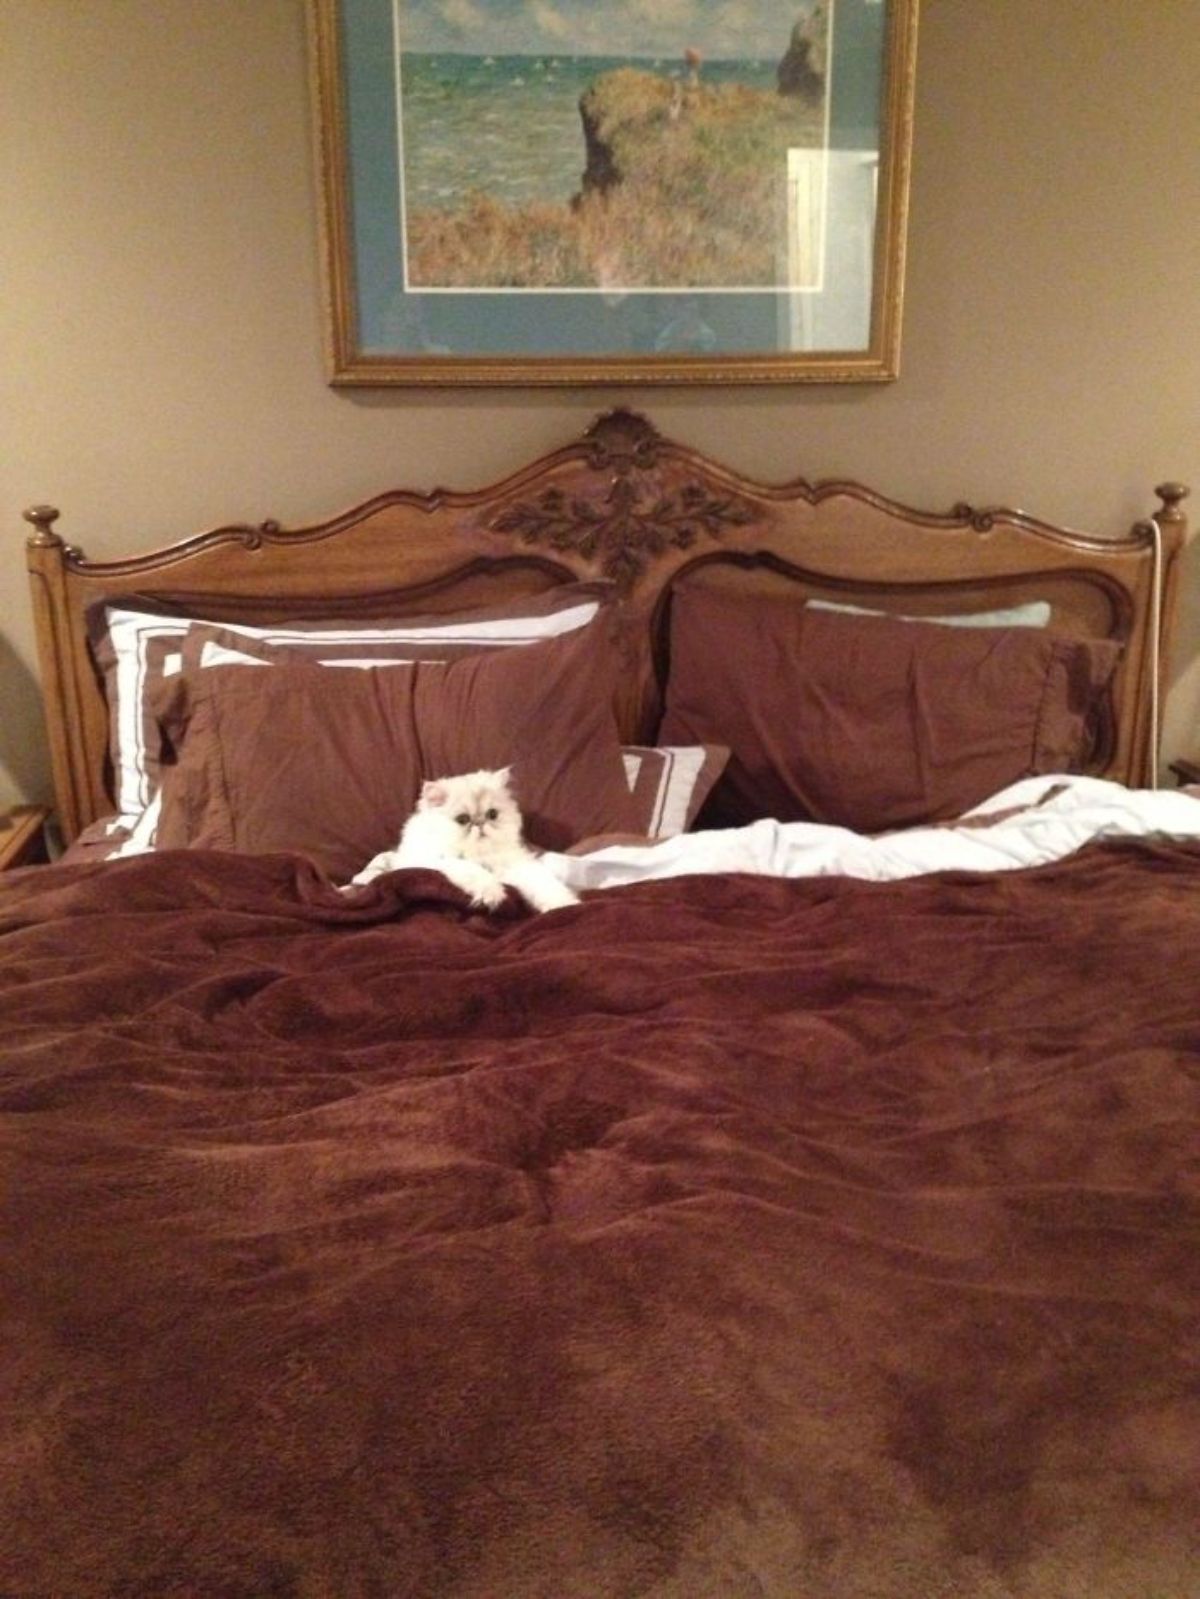 white cat tucked under a brown blabket on a brown and white bed